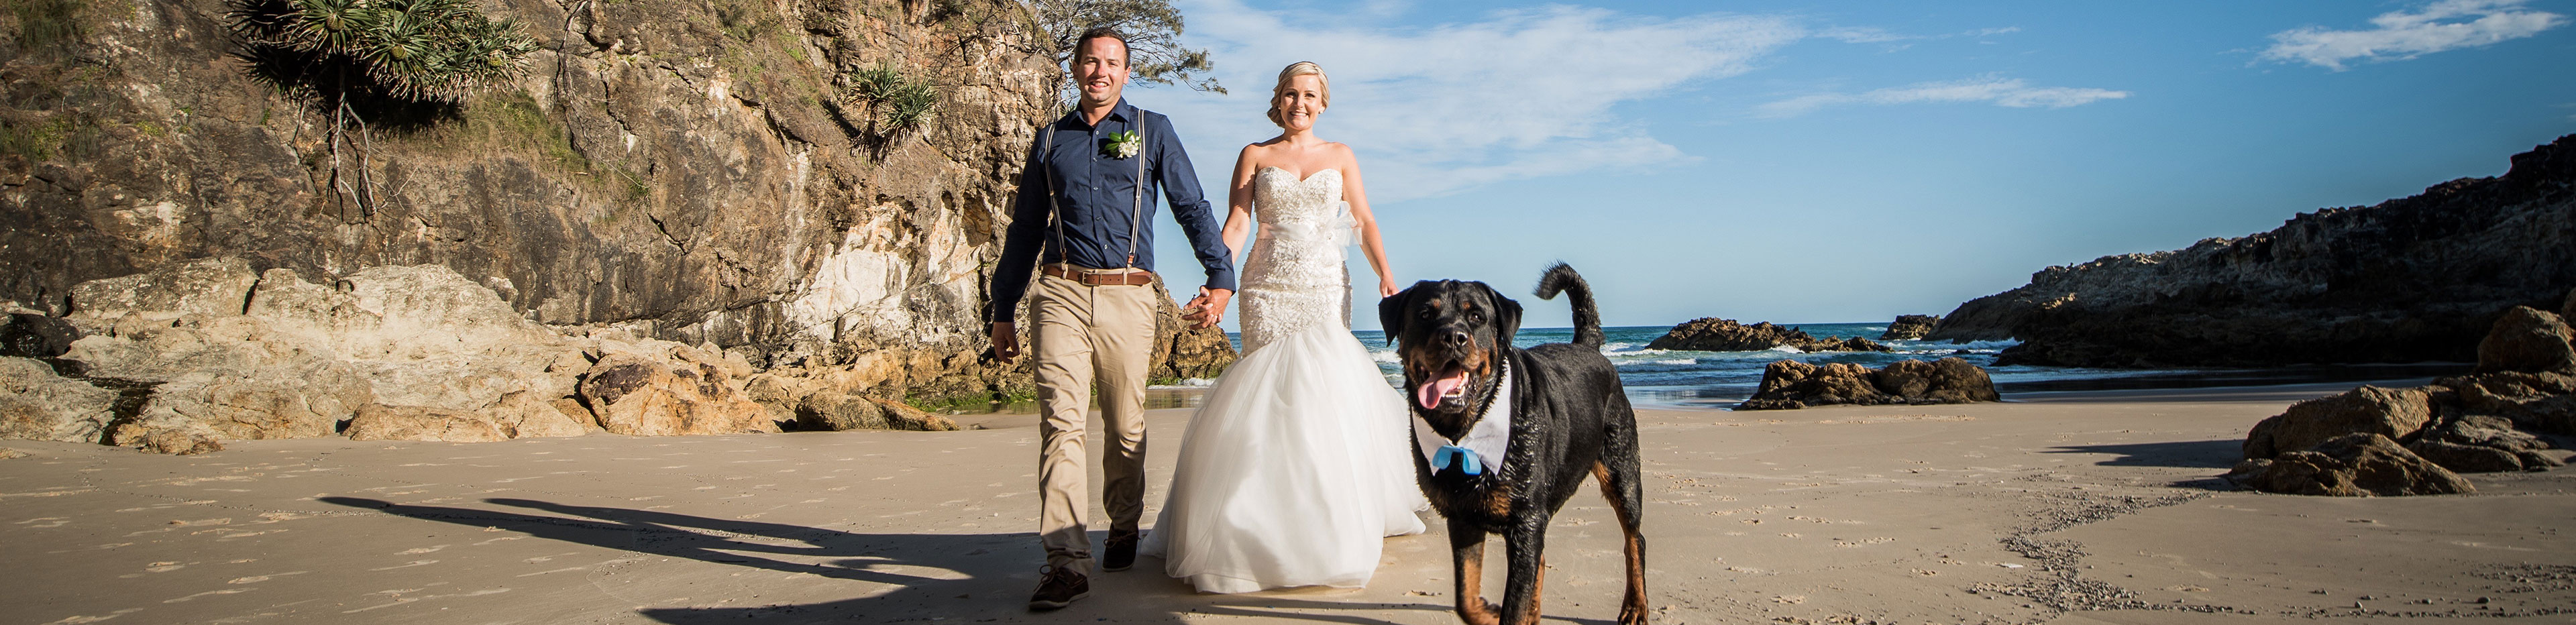 wedding photo of a couple walking along the beach with their dog